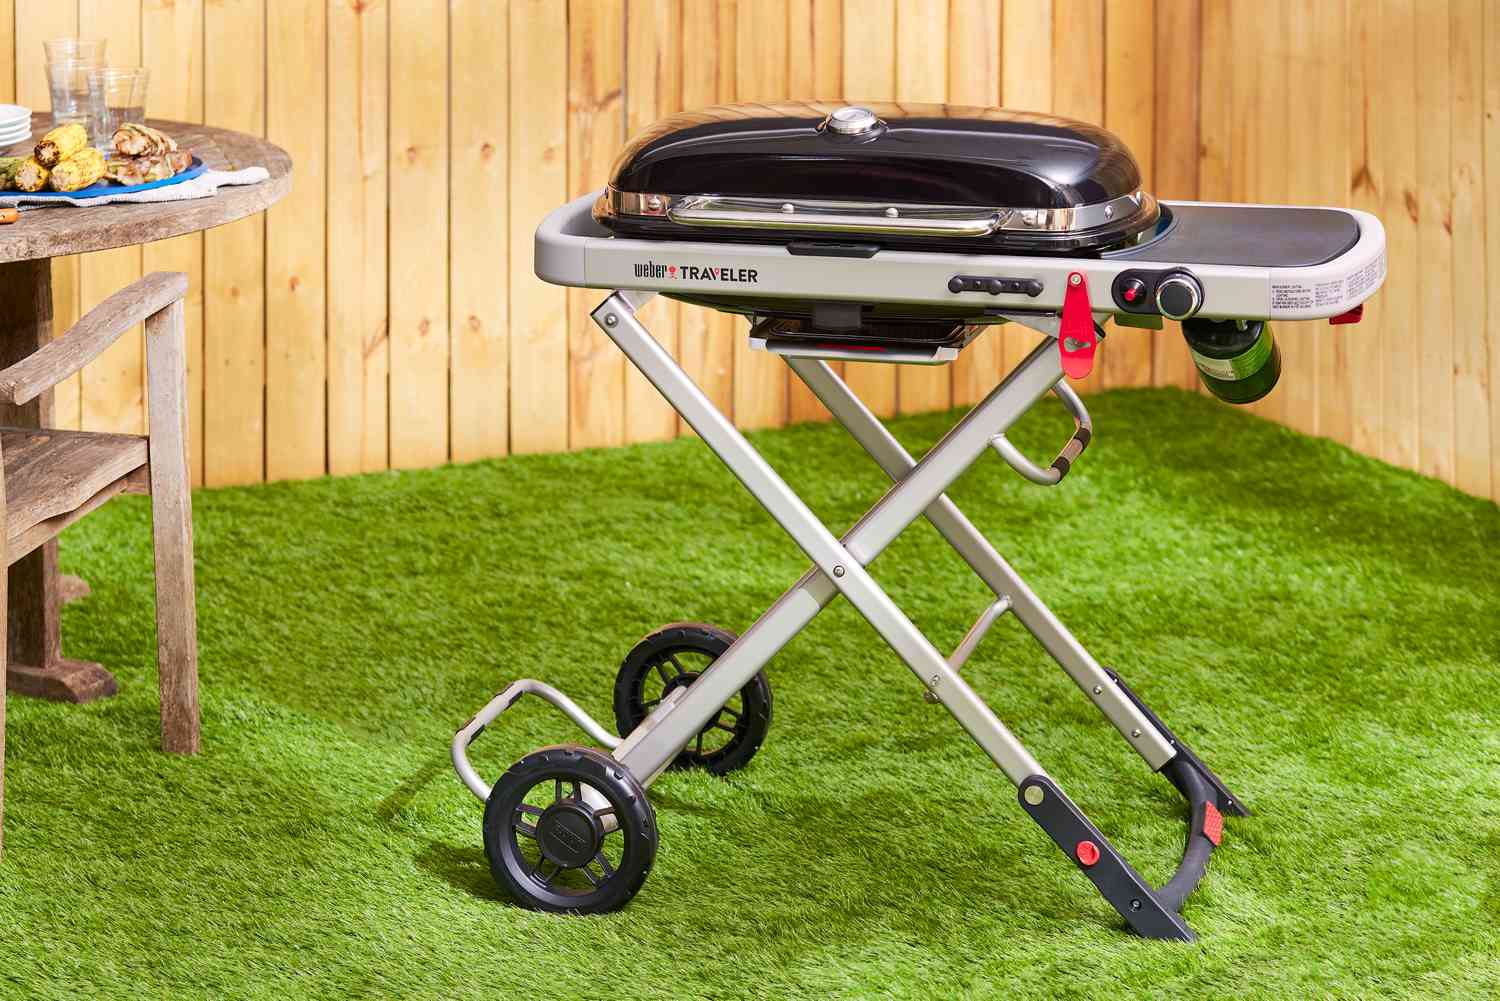 a portable gas grill set up in a backyard